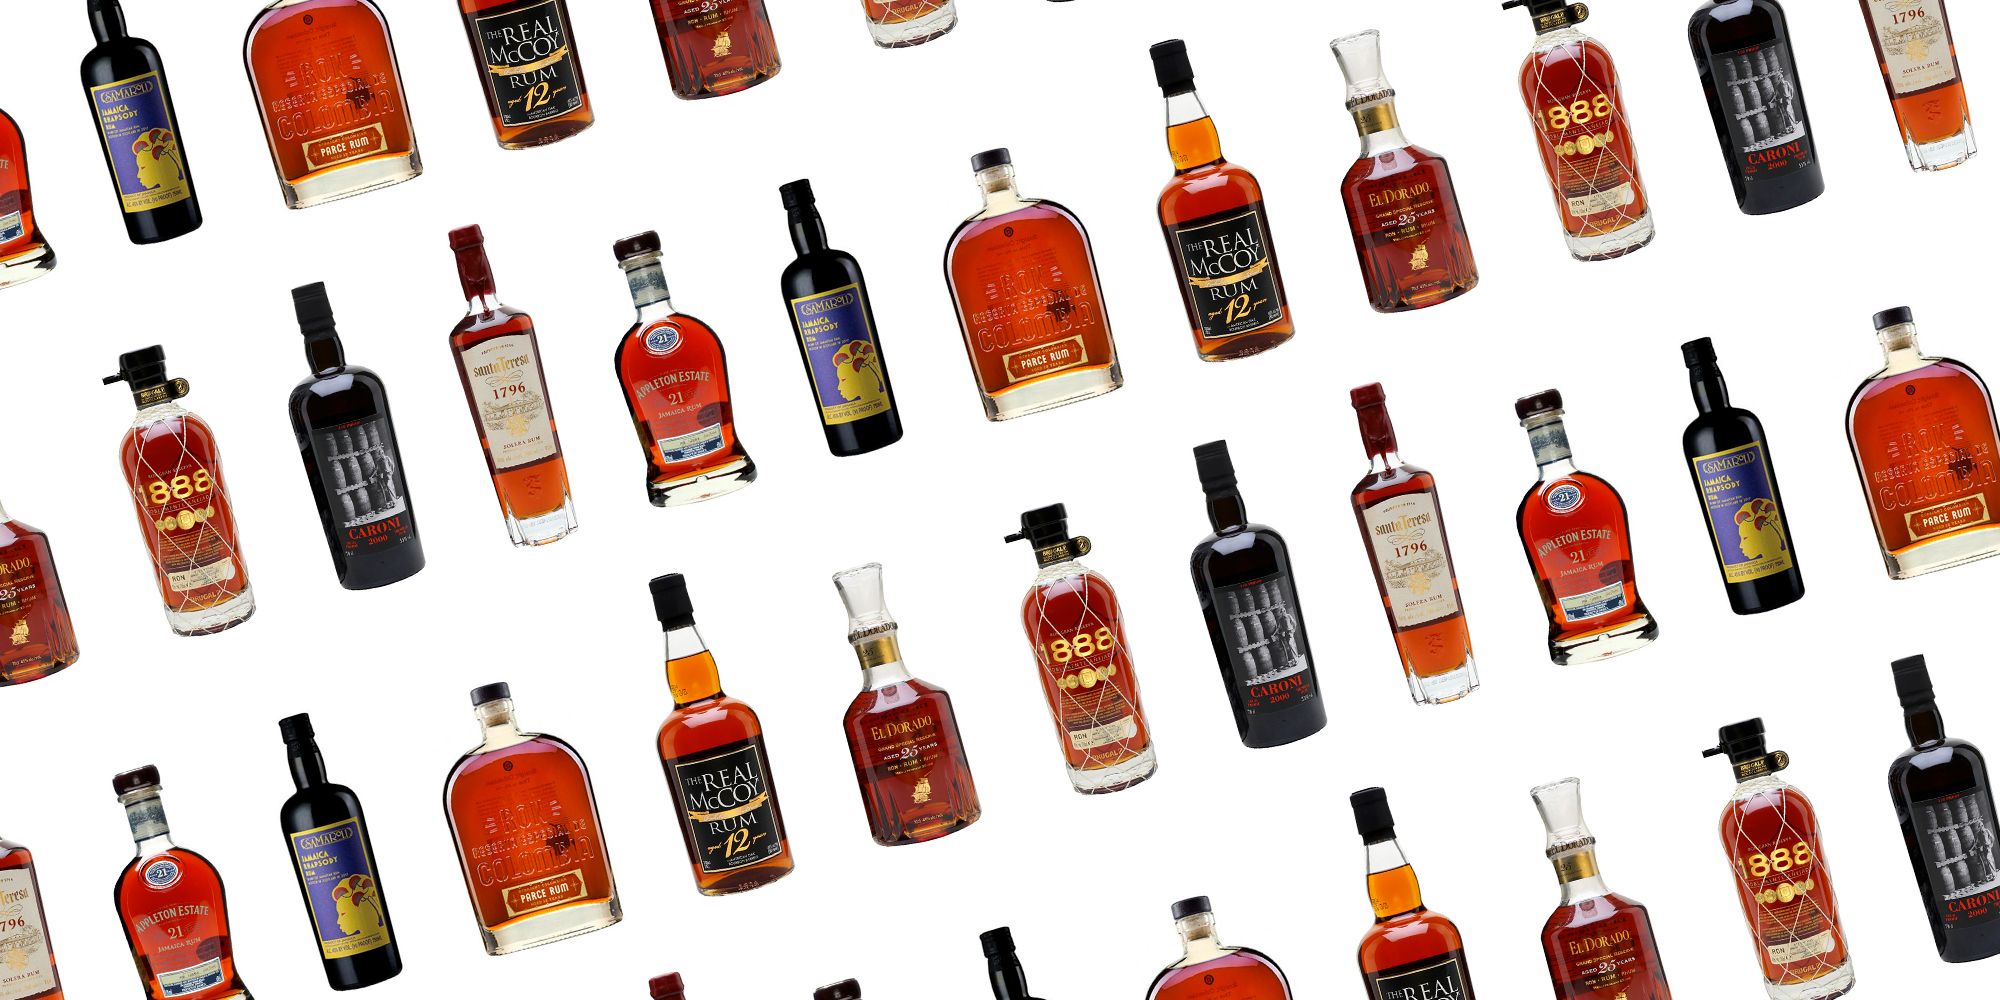 Best Rum Brands 2023: Top Bottles for Sipping and Cocktails